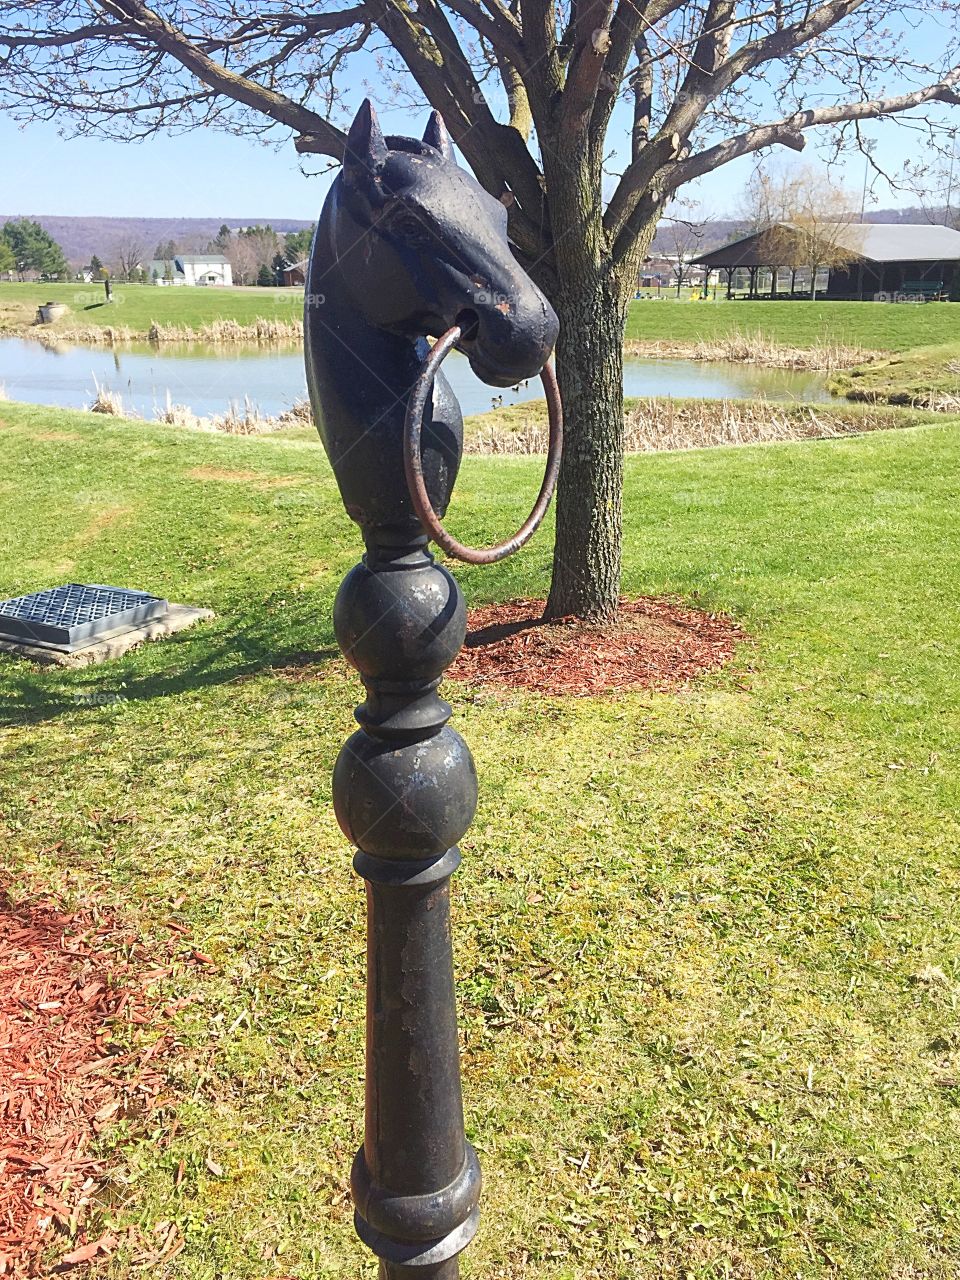 A Horsehead hitching post for the Amish in the community. 